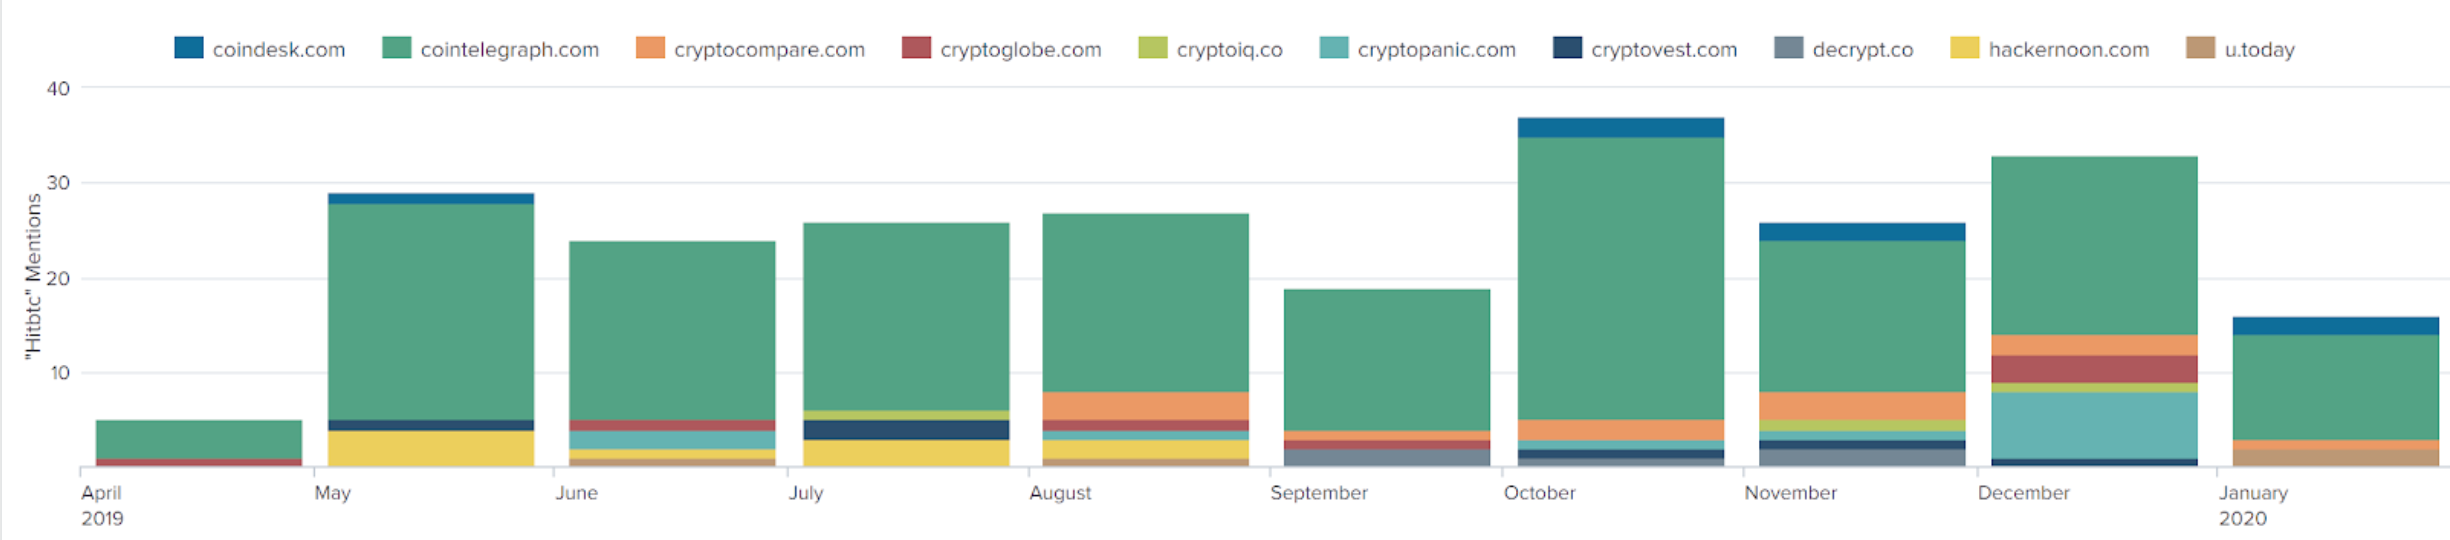 HitBTC Mentions by Media Outlet (Jan 20, 2020; -9mon). Source: NTerminal